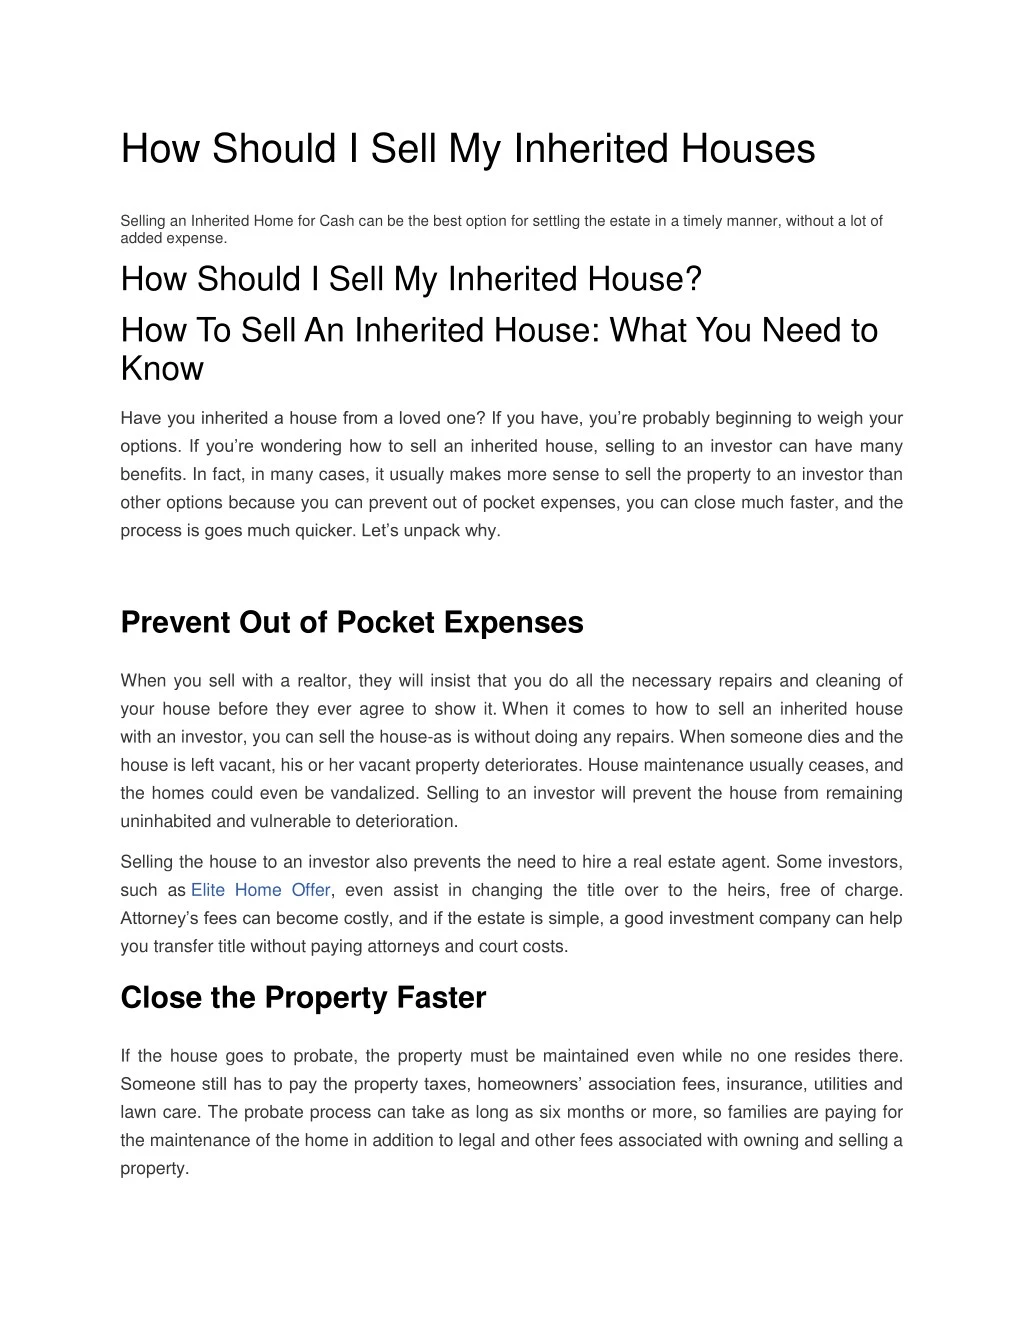 how should i sell my inherited houses